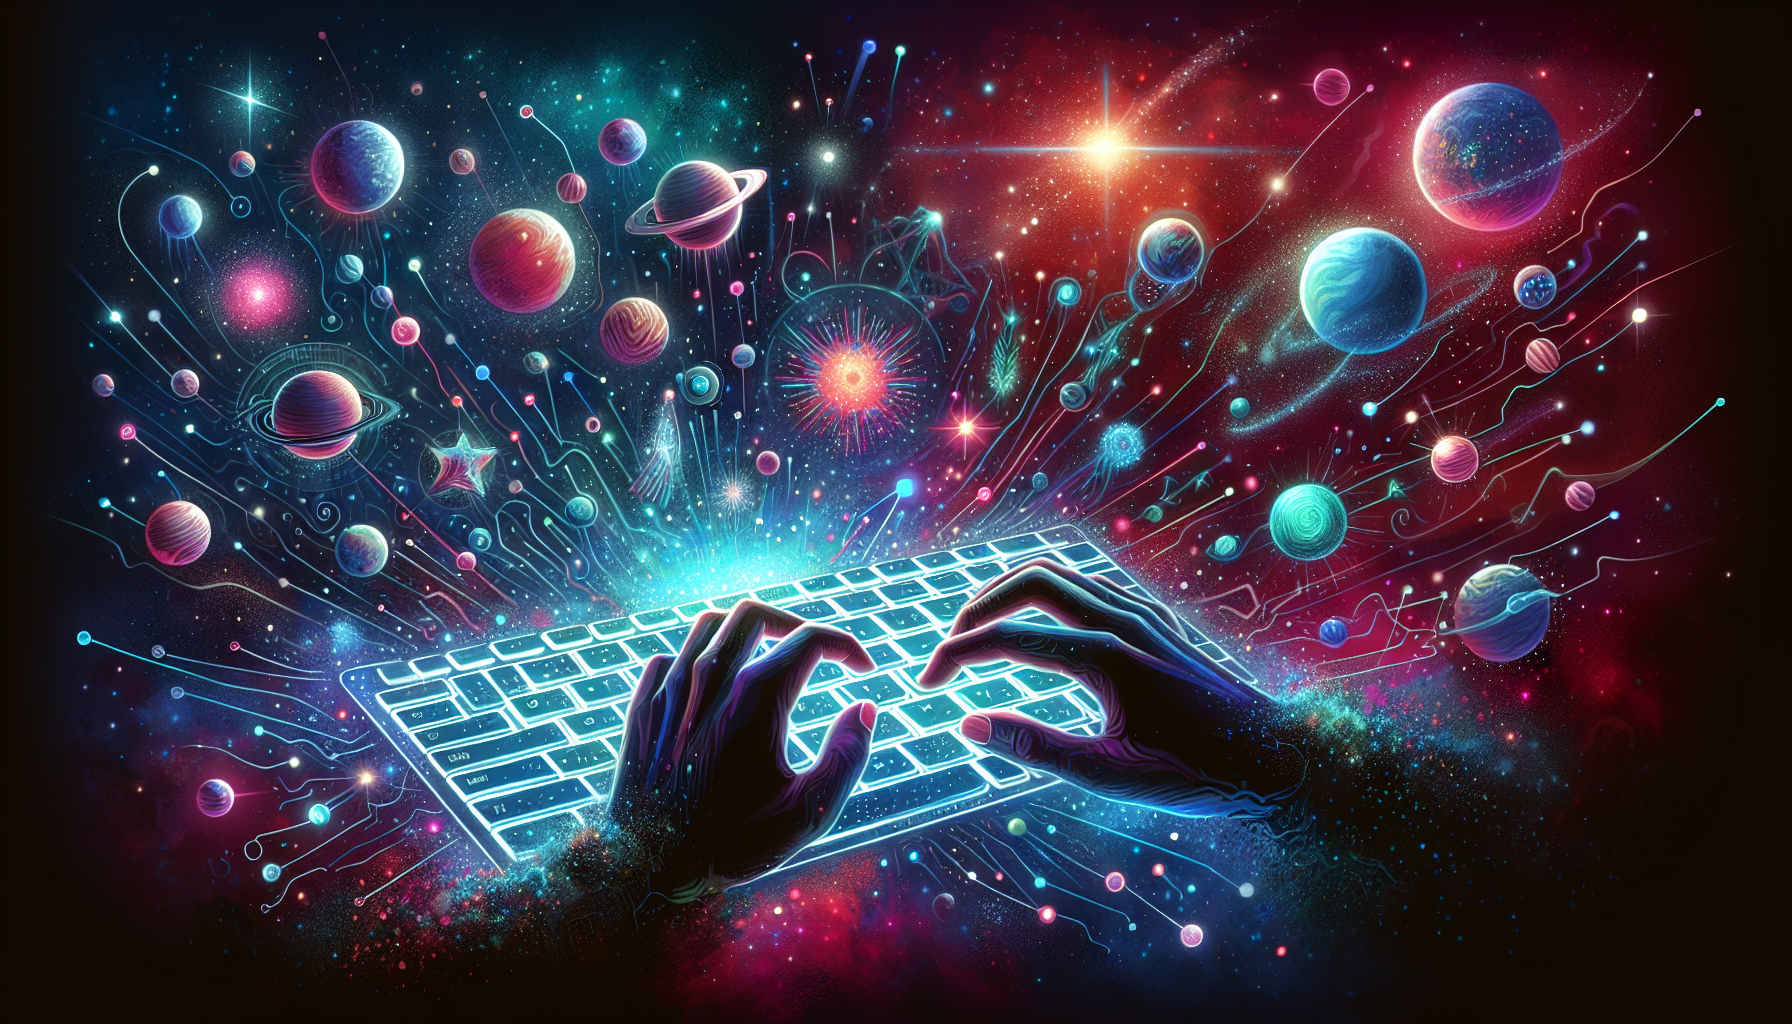 Hands typing on a glowing keyboard floating in a dark space with planets and constellations in the background.